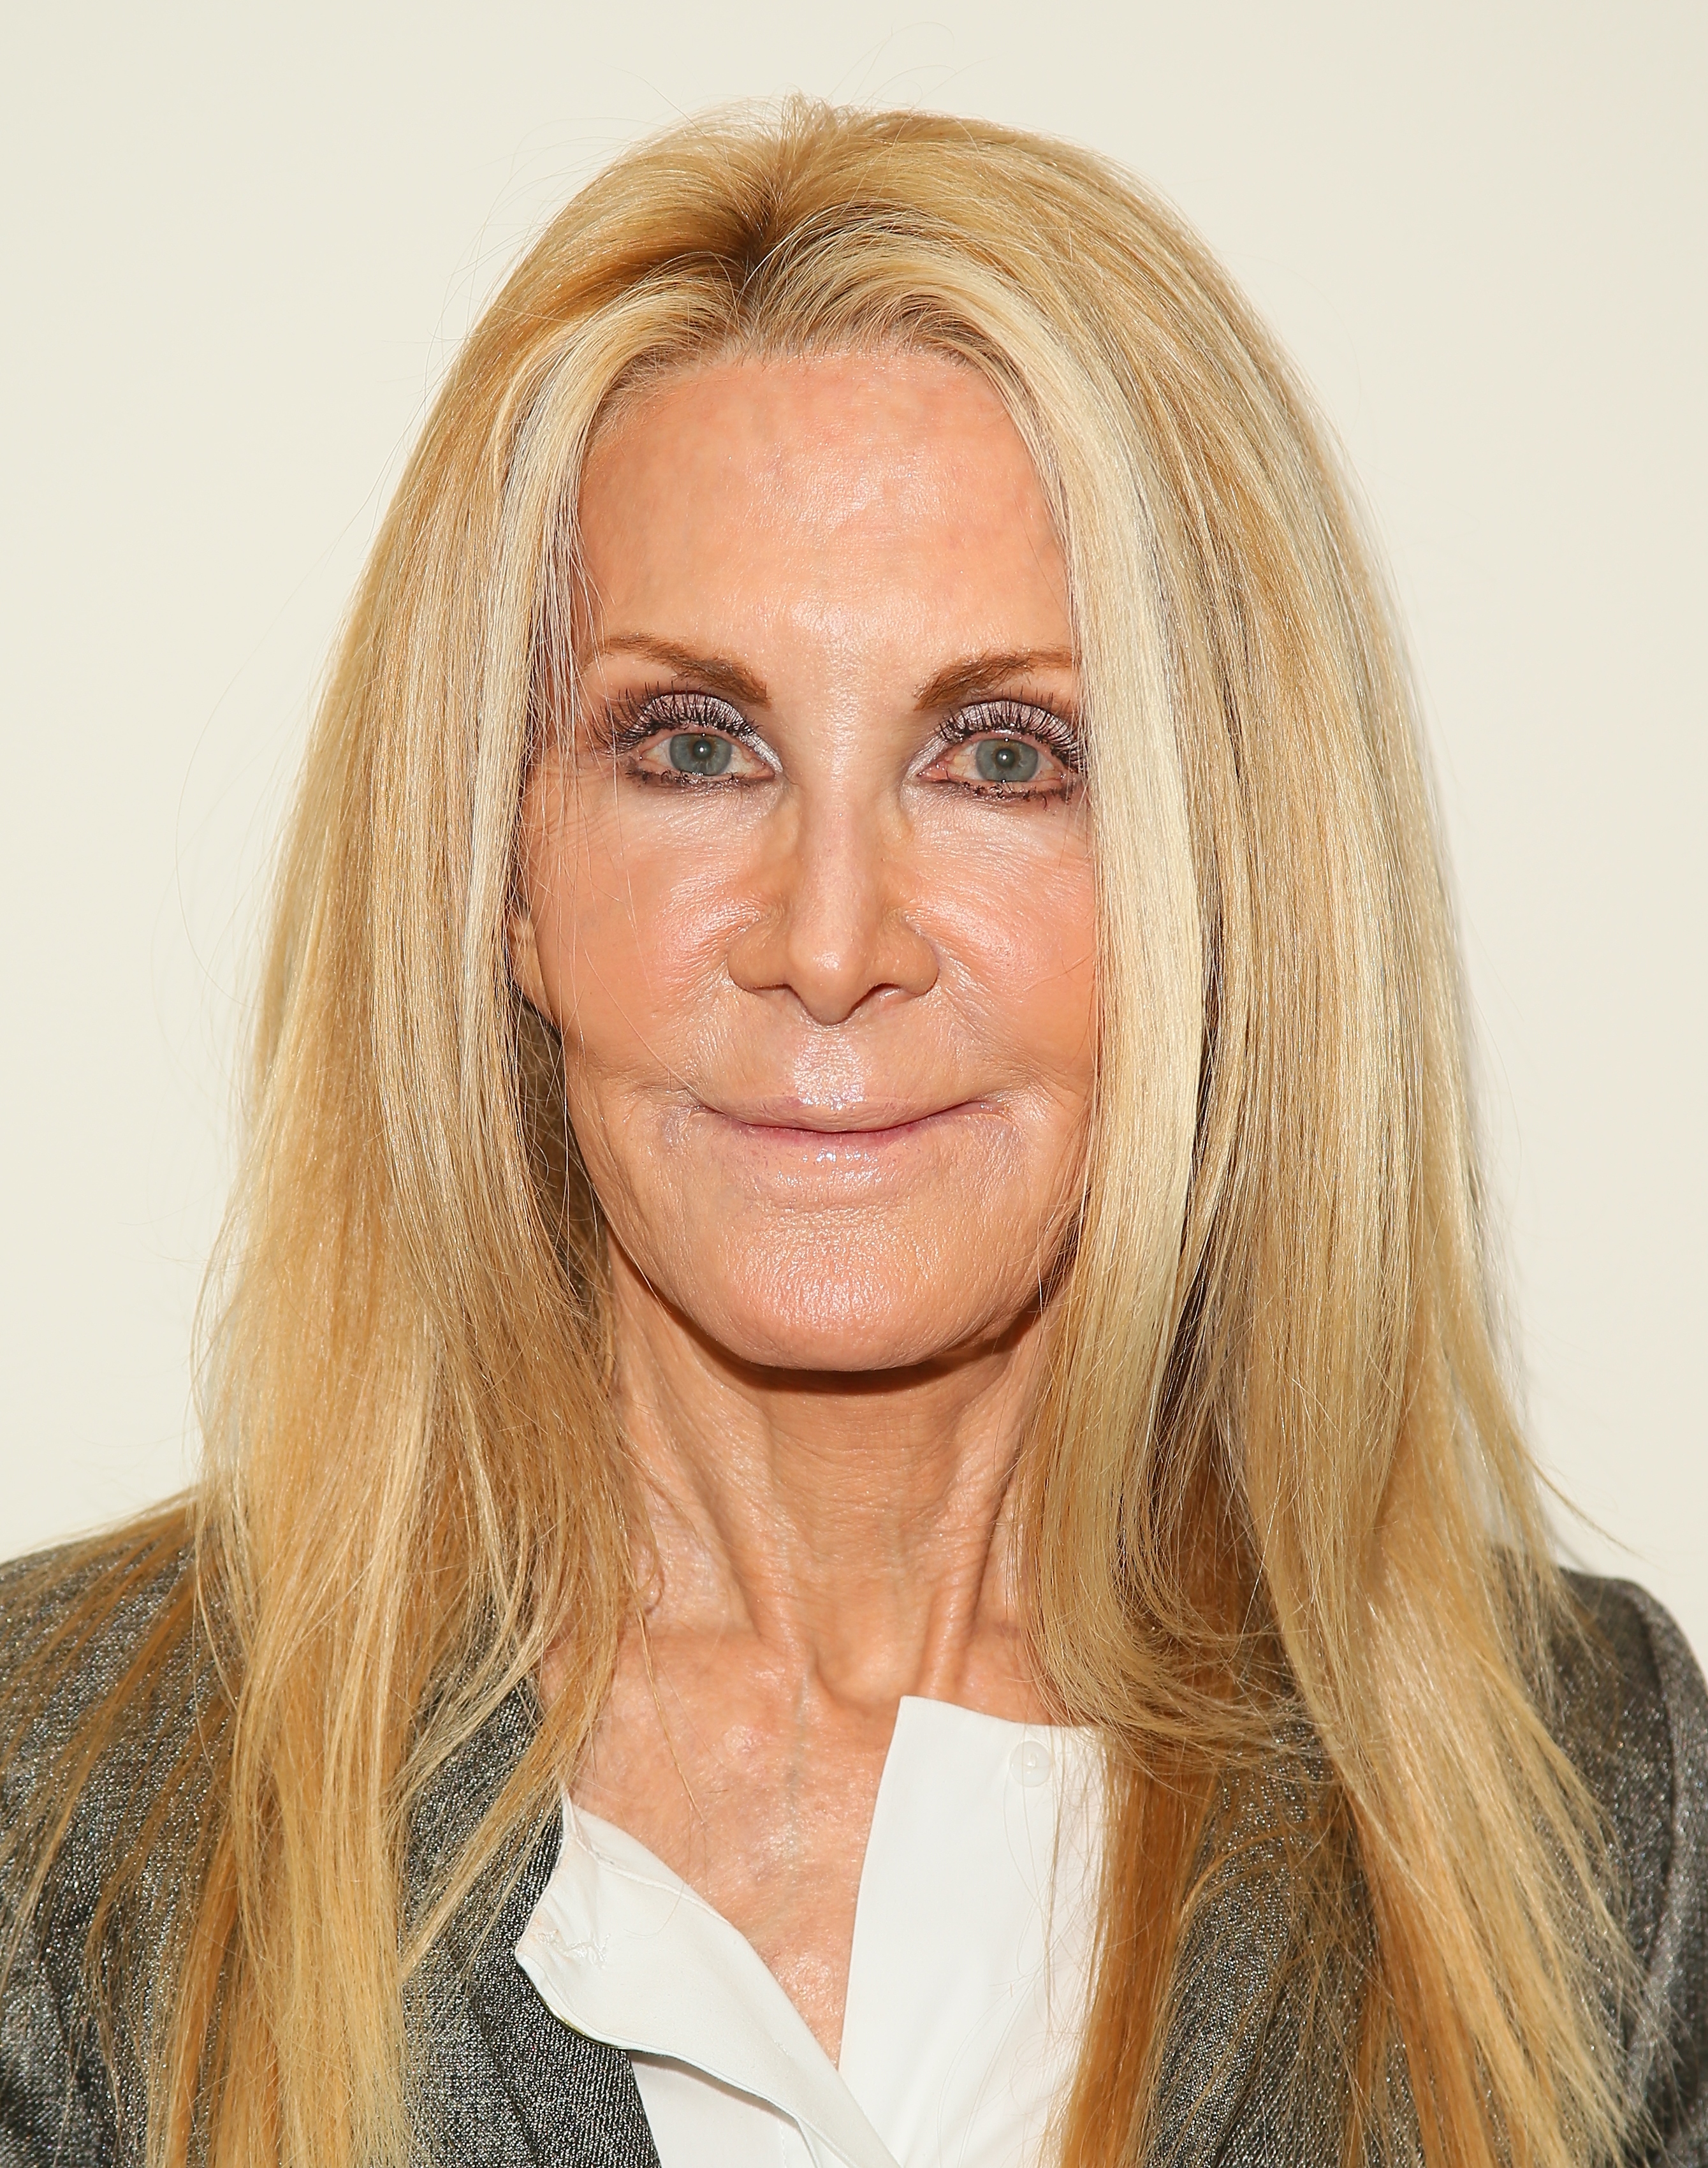 Joan Van Ark attends a media preview for "Murder, Lust and Madness" on March 24, 2016 in Beverly Hills, California. | Source: Getty Images